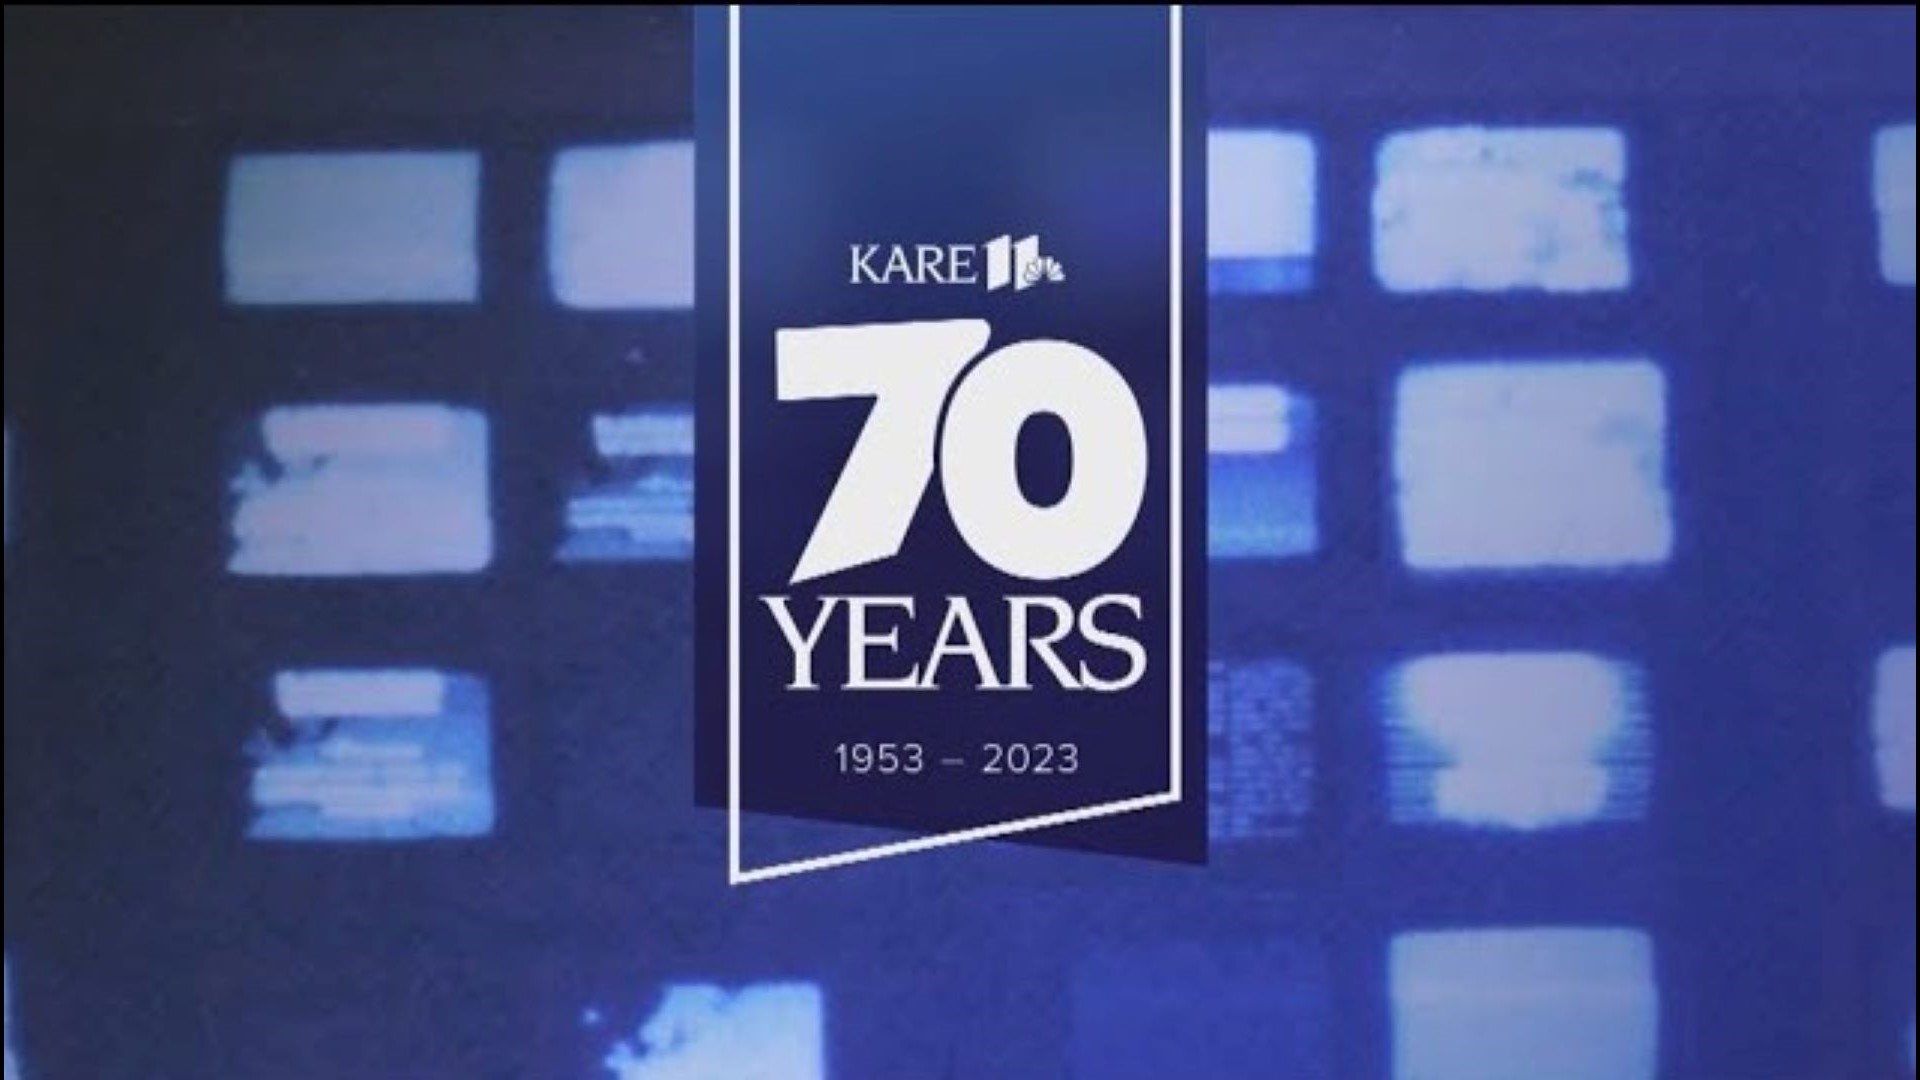 From the everyday moments to the events that made history, KARE 11 is looking back on seven decades of broadcasting, and the people who made it happen.